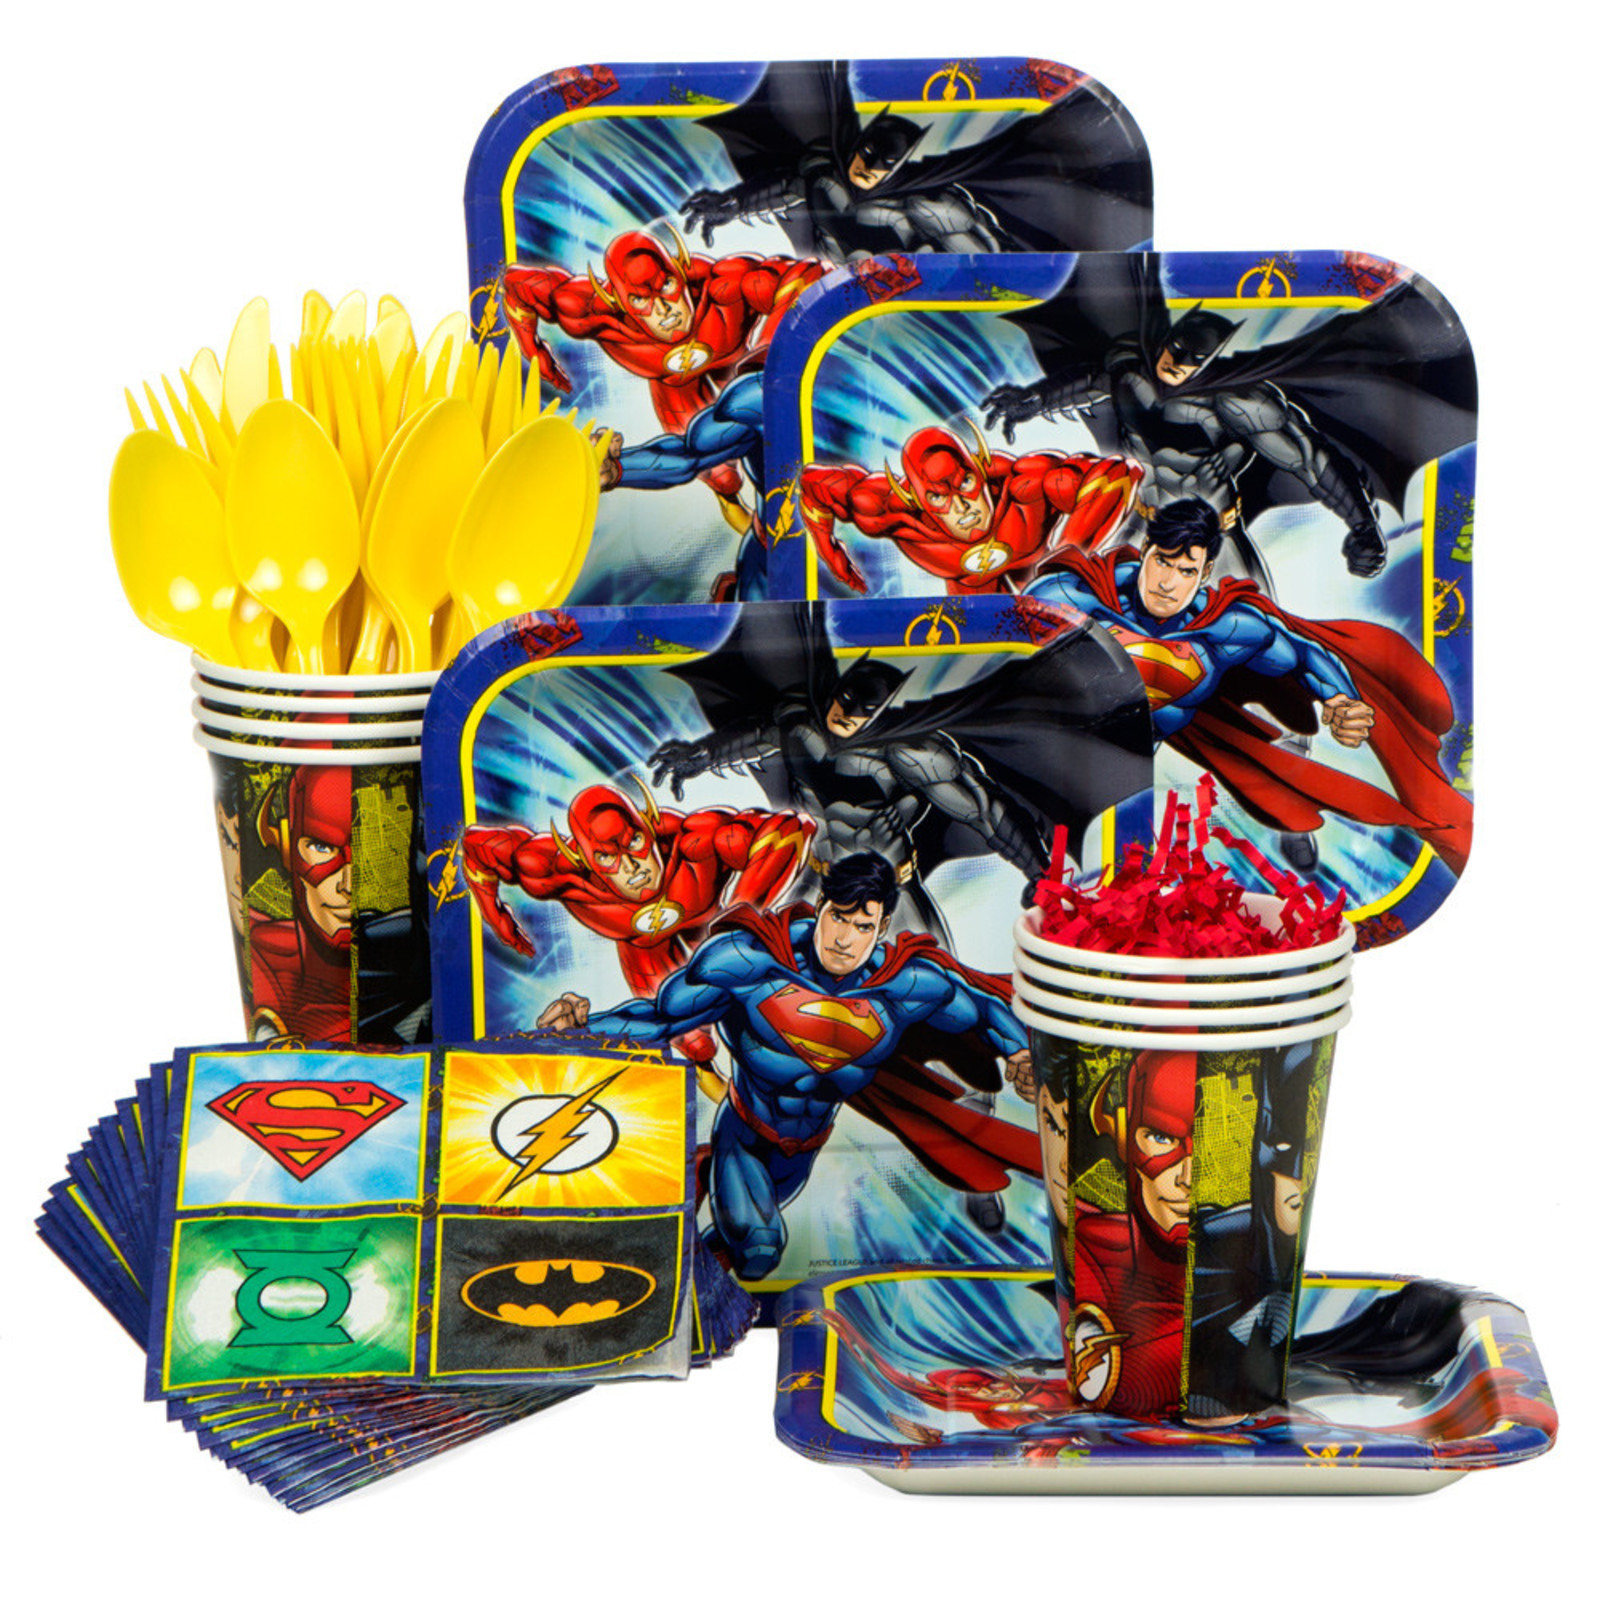 Justice League Birthday Party Supplies
 Justice League Birthday Party Standard Tableware Kit